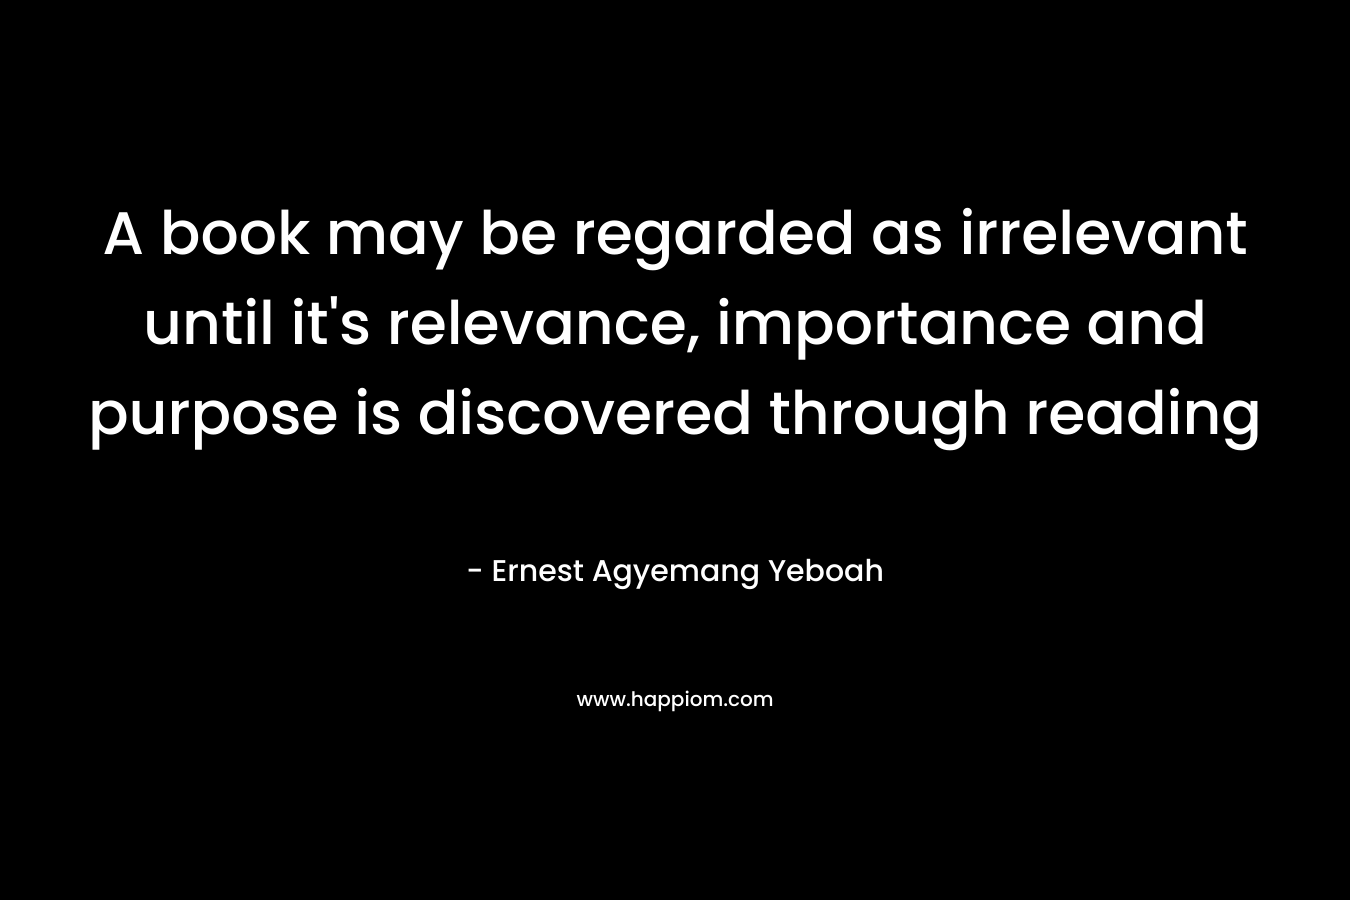 A book may be regarded as irrelevant until it's relevance, importance and purpose is discovered through reading